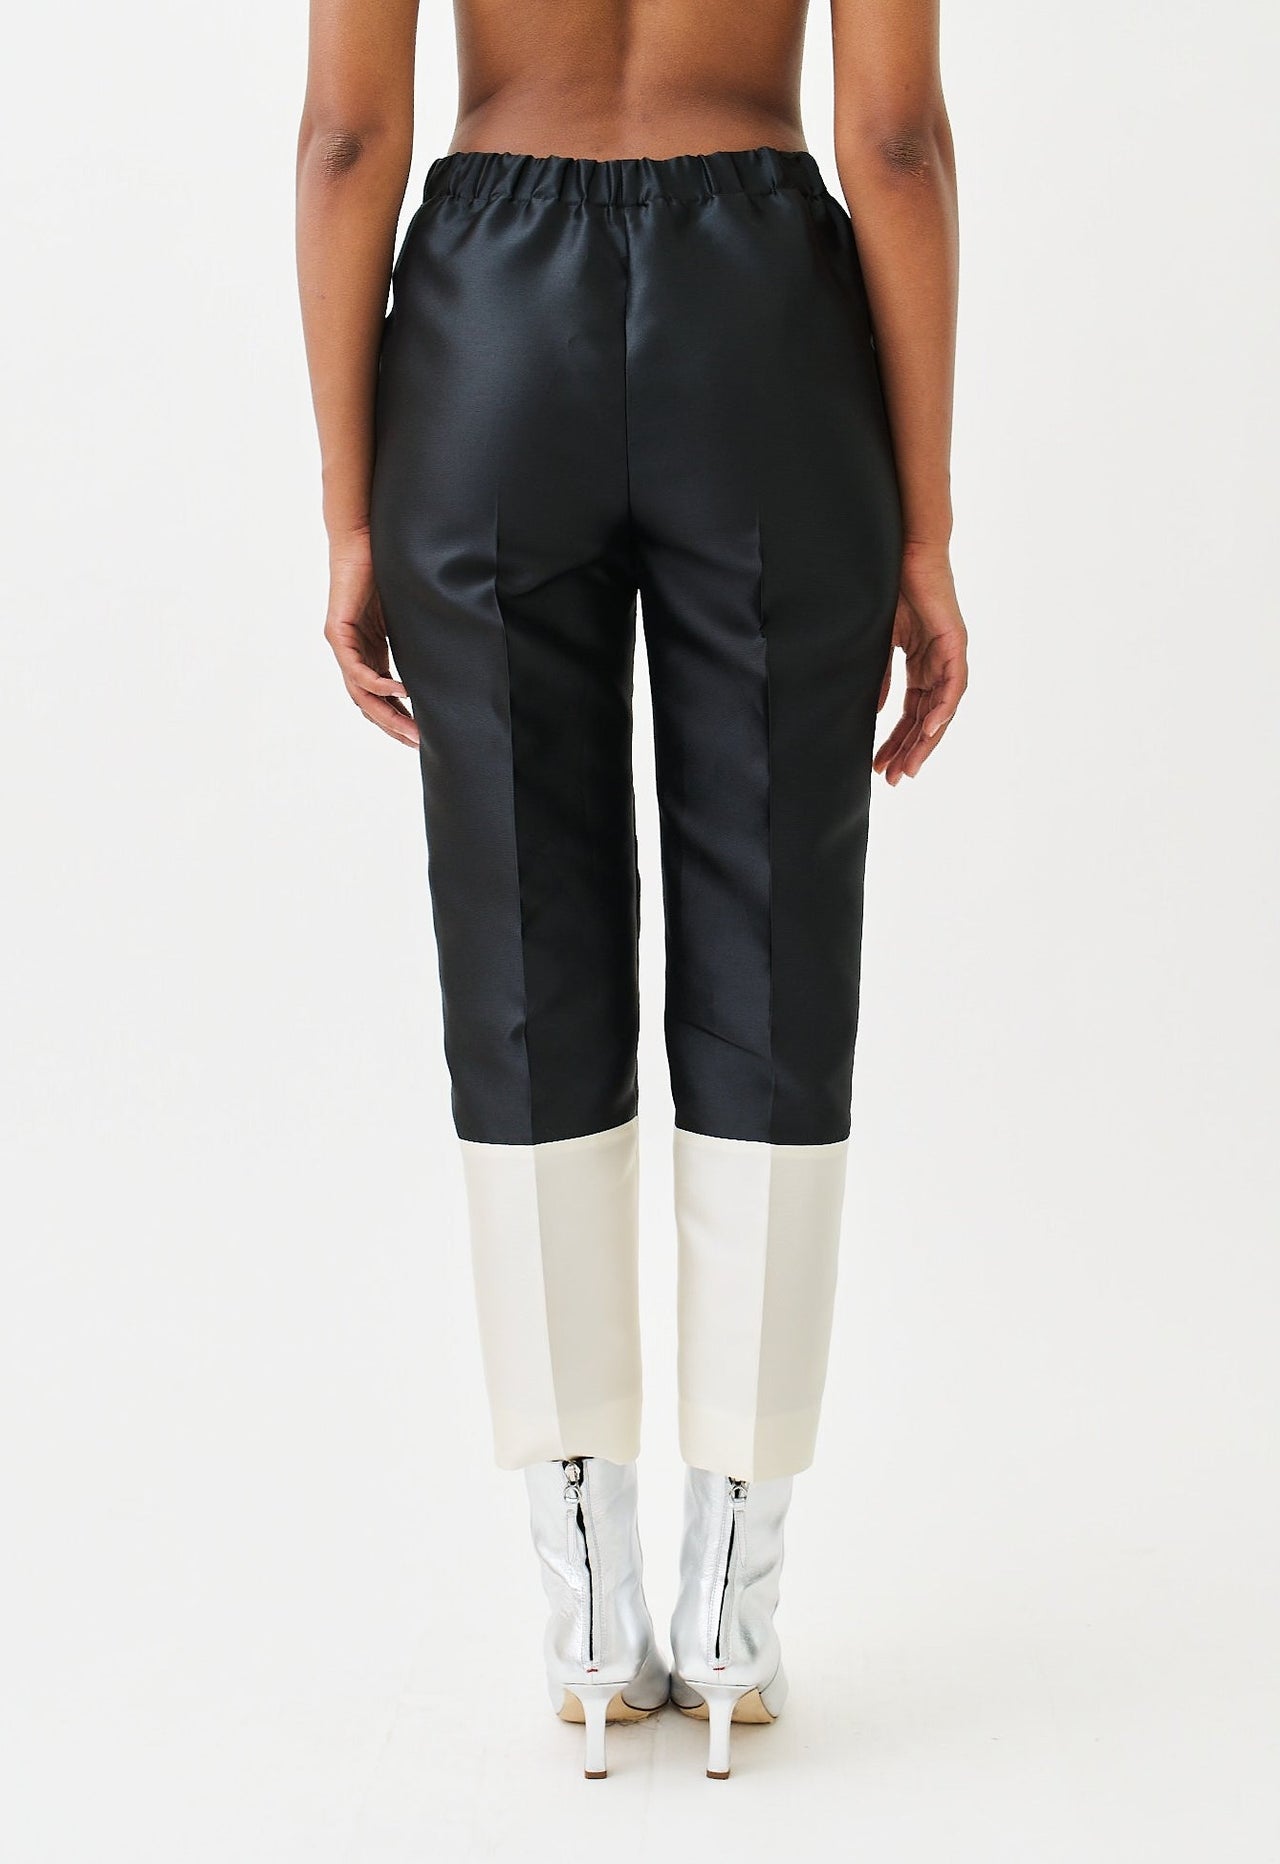 wingate collecton peyton black white pants on female model with silver boots back